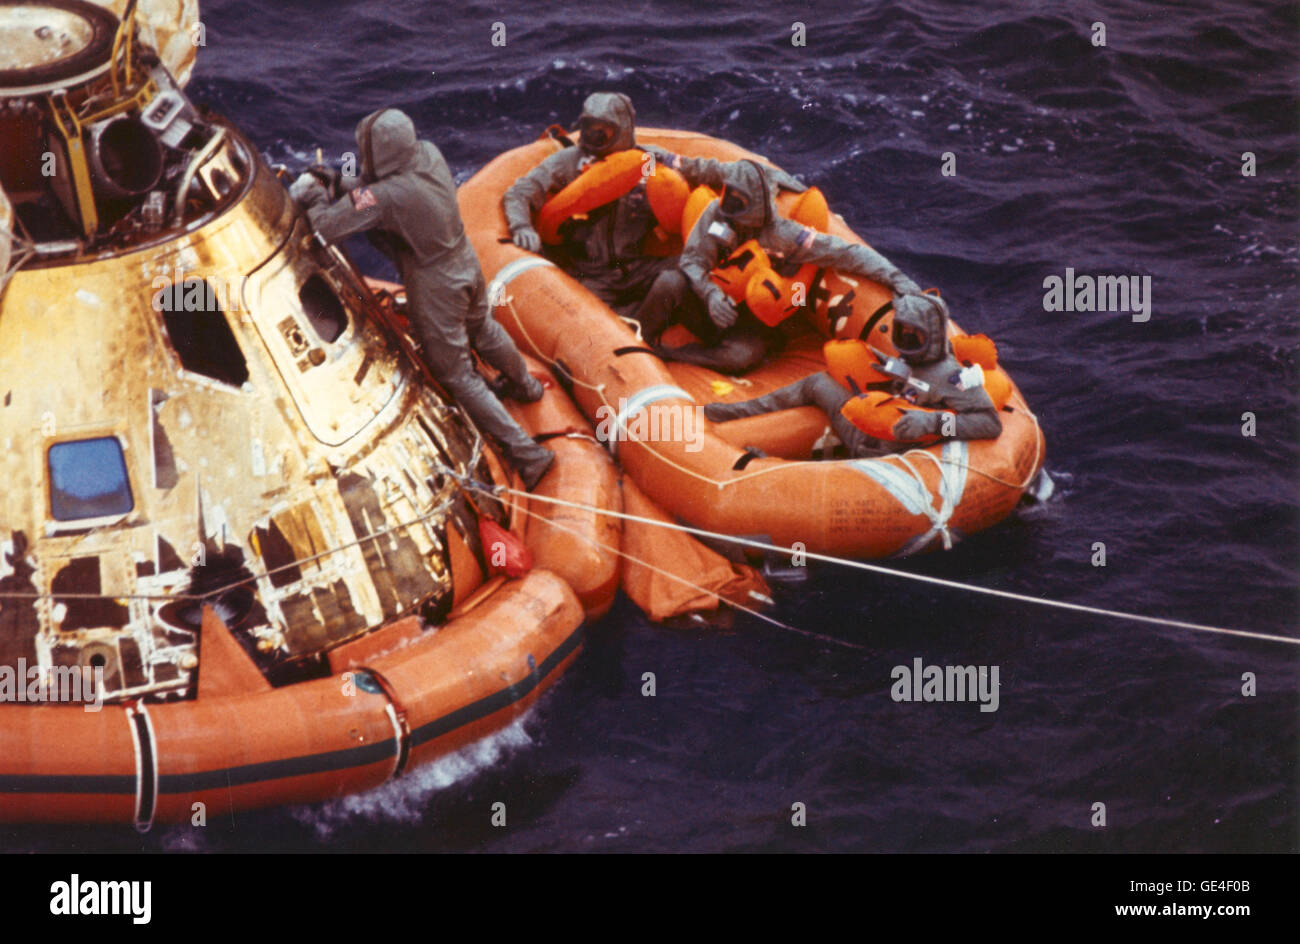 (July 24, 1969) Pararescueman Lt. Clancy Hatleberg closes the Apollo 11 spacecraft hatch as astronauts Neil Armstrong, Michael Collins, and Buzz Aldrin, Jr., await helicopter pickup from their life raft. They splashed down at 12:50 pm EDT July 24, 1969, 900 miles southwest of Hawaii after a successful lunar landing mission.  Image # : 108-KSC-69PC-452 Stock Photo